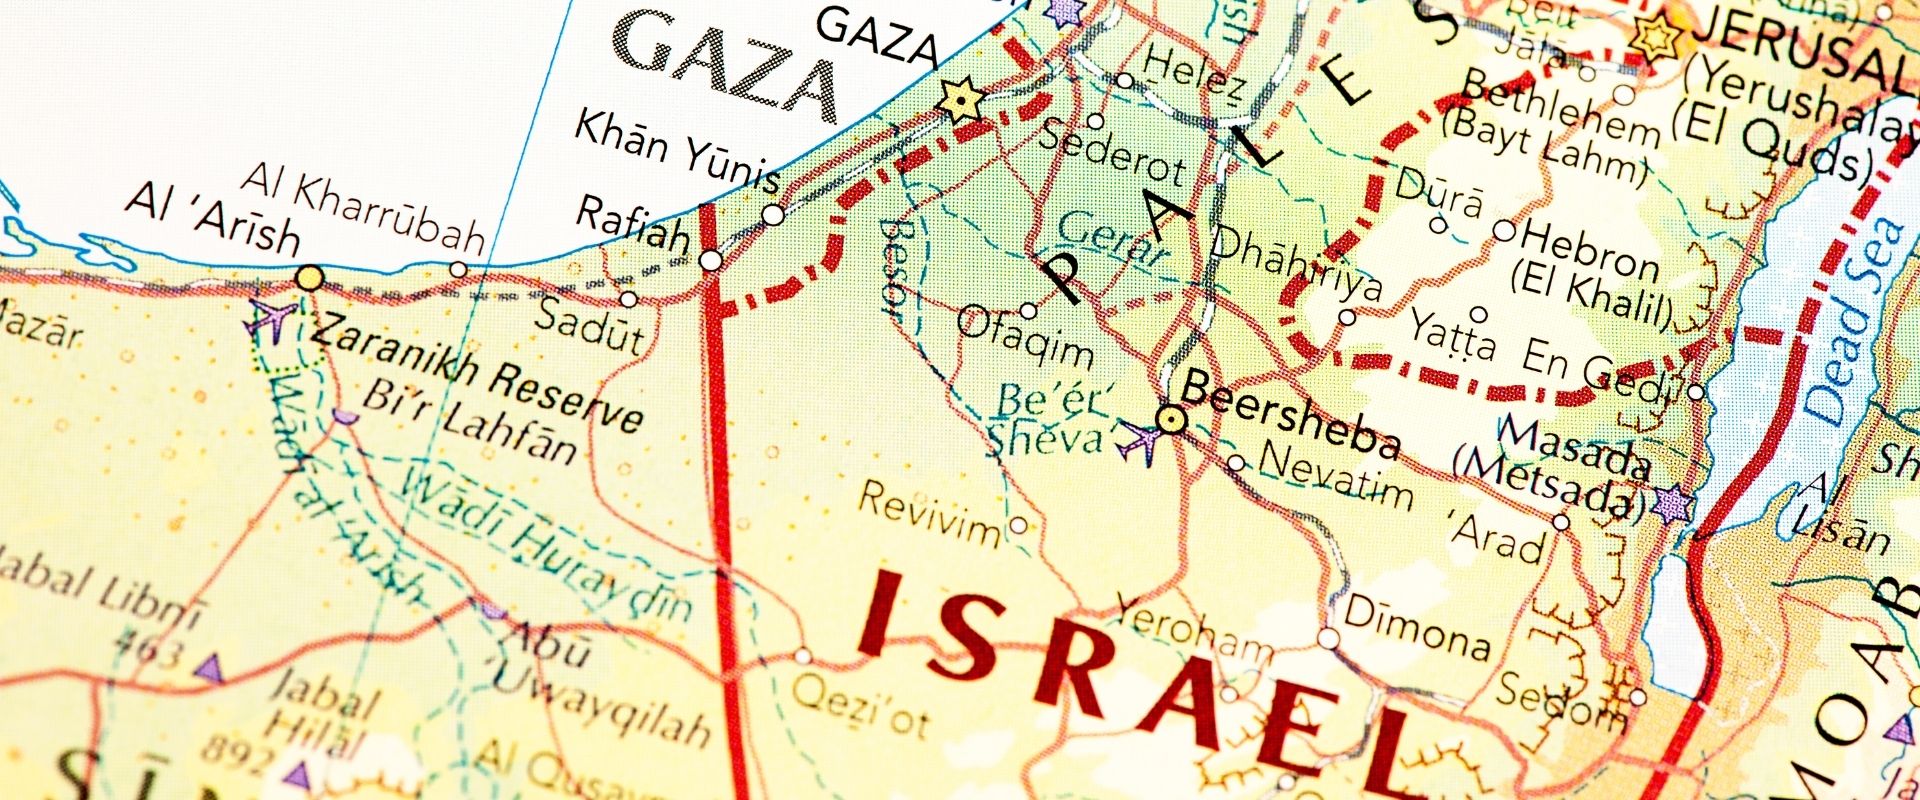 map showing israel and gaza